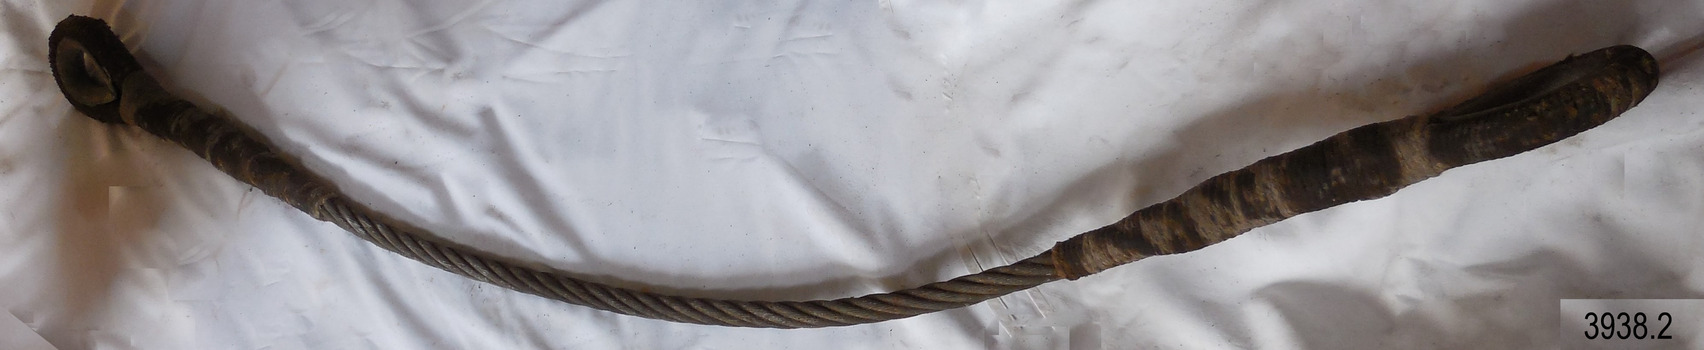 Connecting cable has an eyelet at each end that is reinforced by strong rope work.